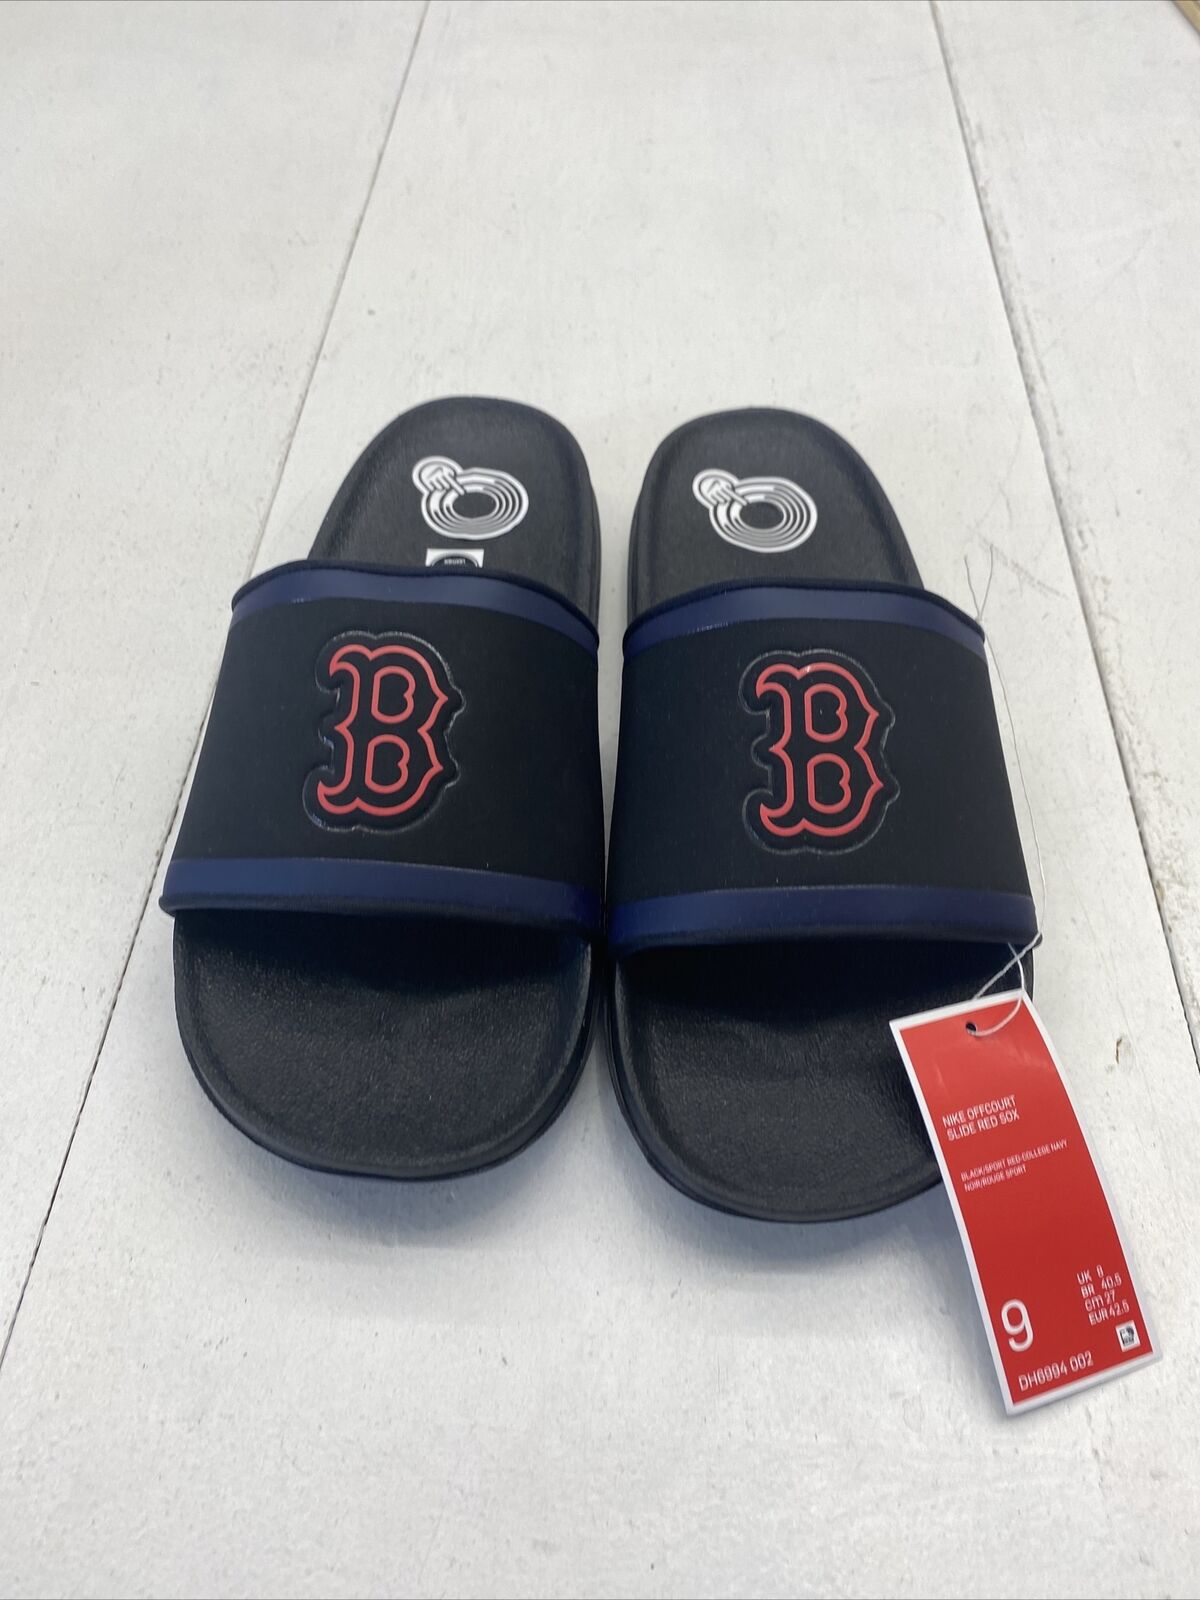 NIKE Offcourt Boston Red Sox Slides Black Blue Red Size 9 NEW - beyond  exchange